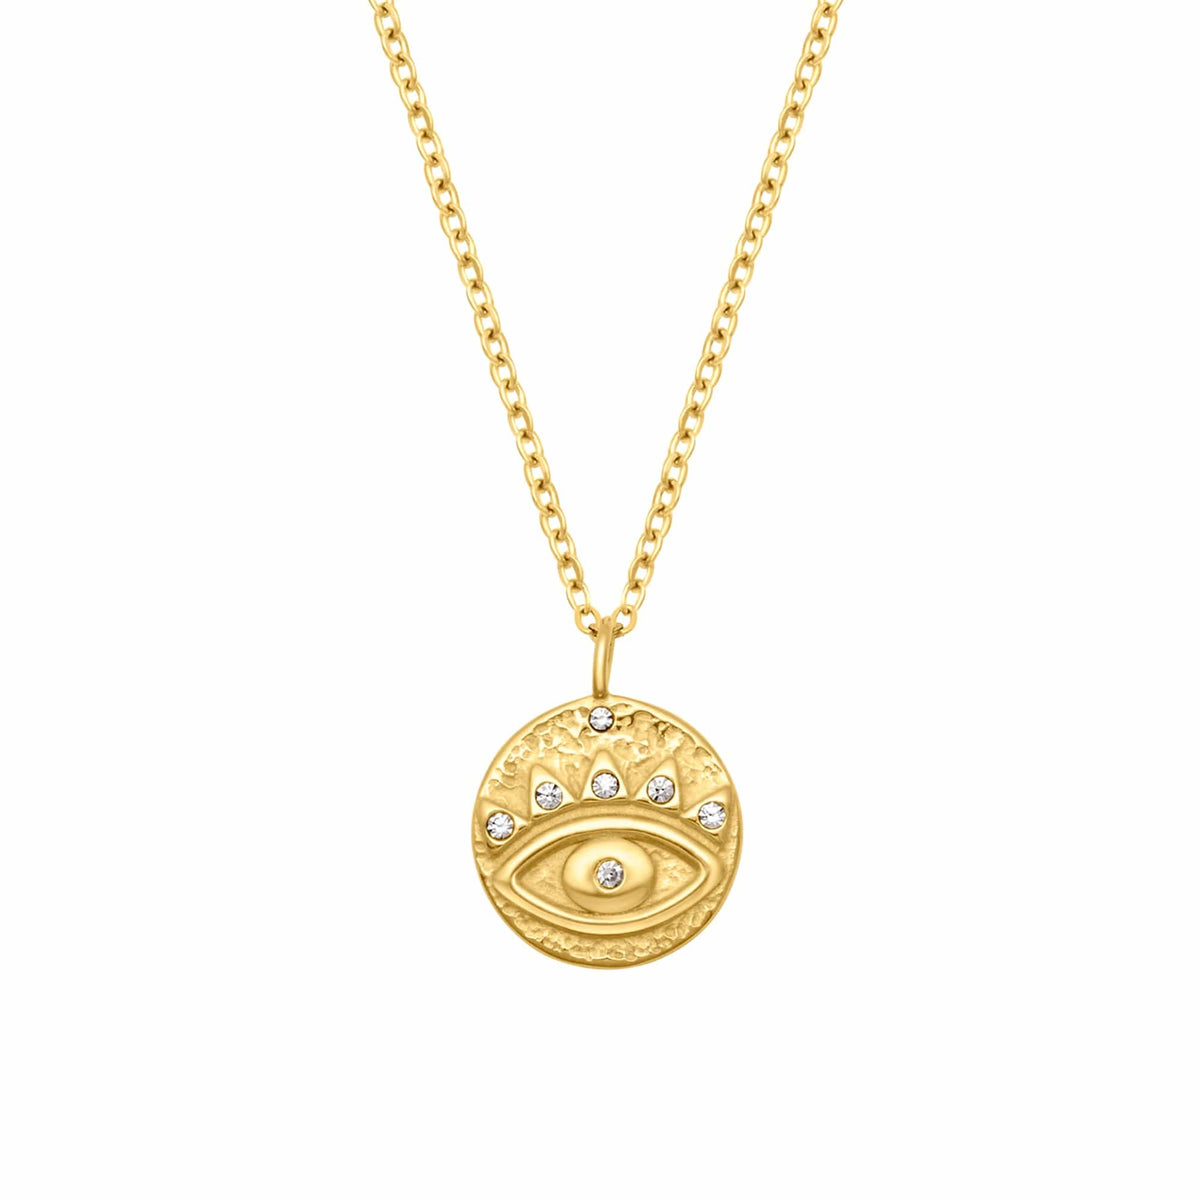 BohoMoon Stainless Steel Montana Necklace Gold